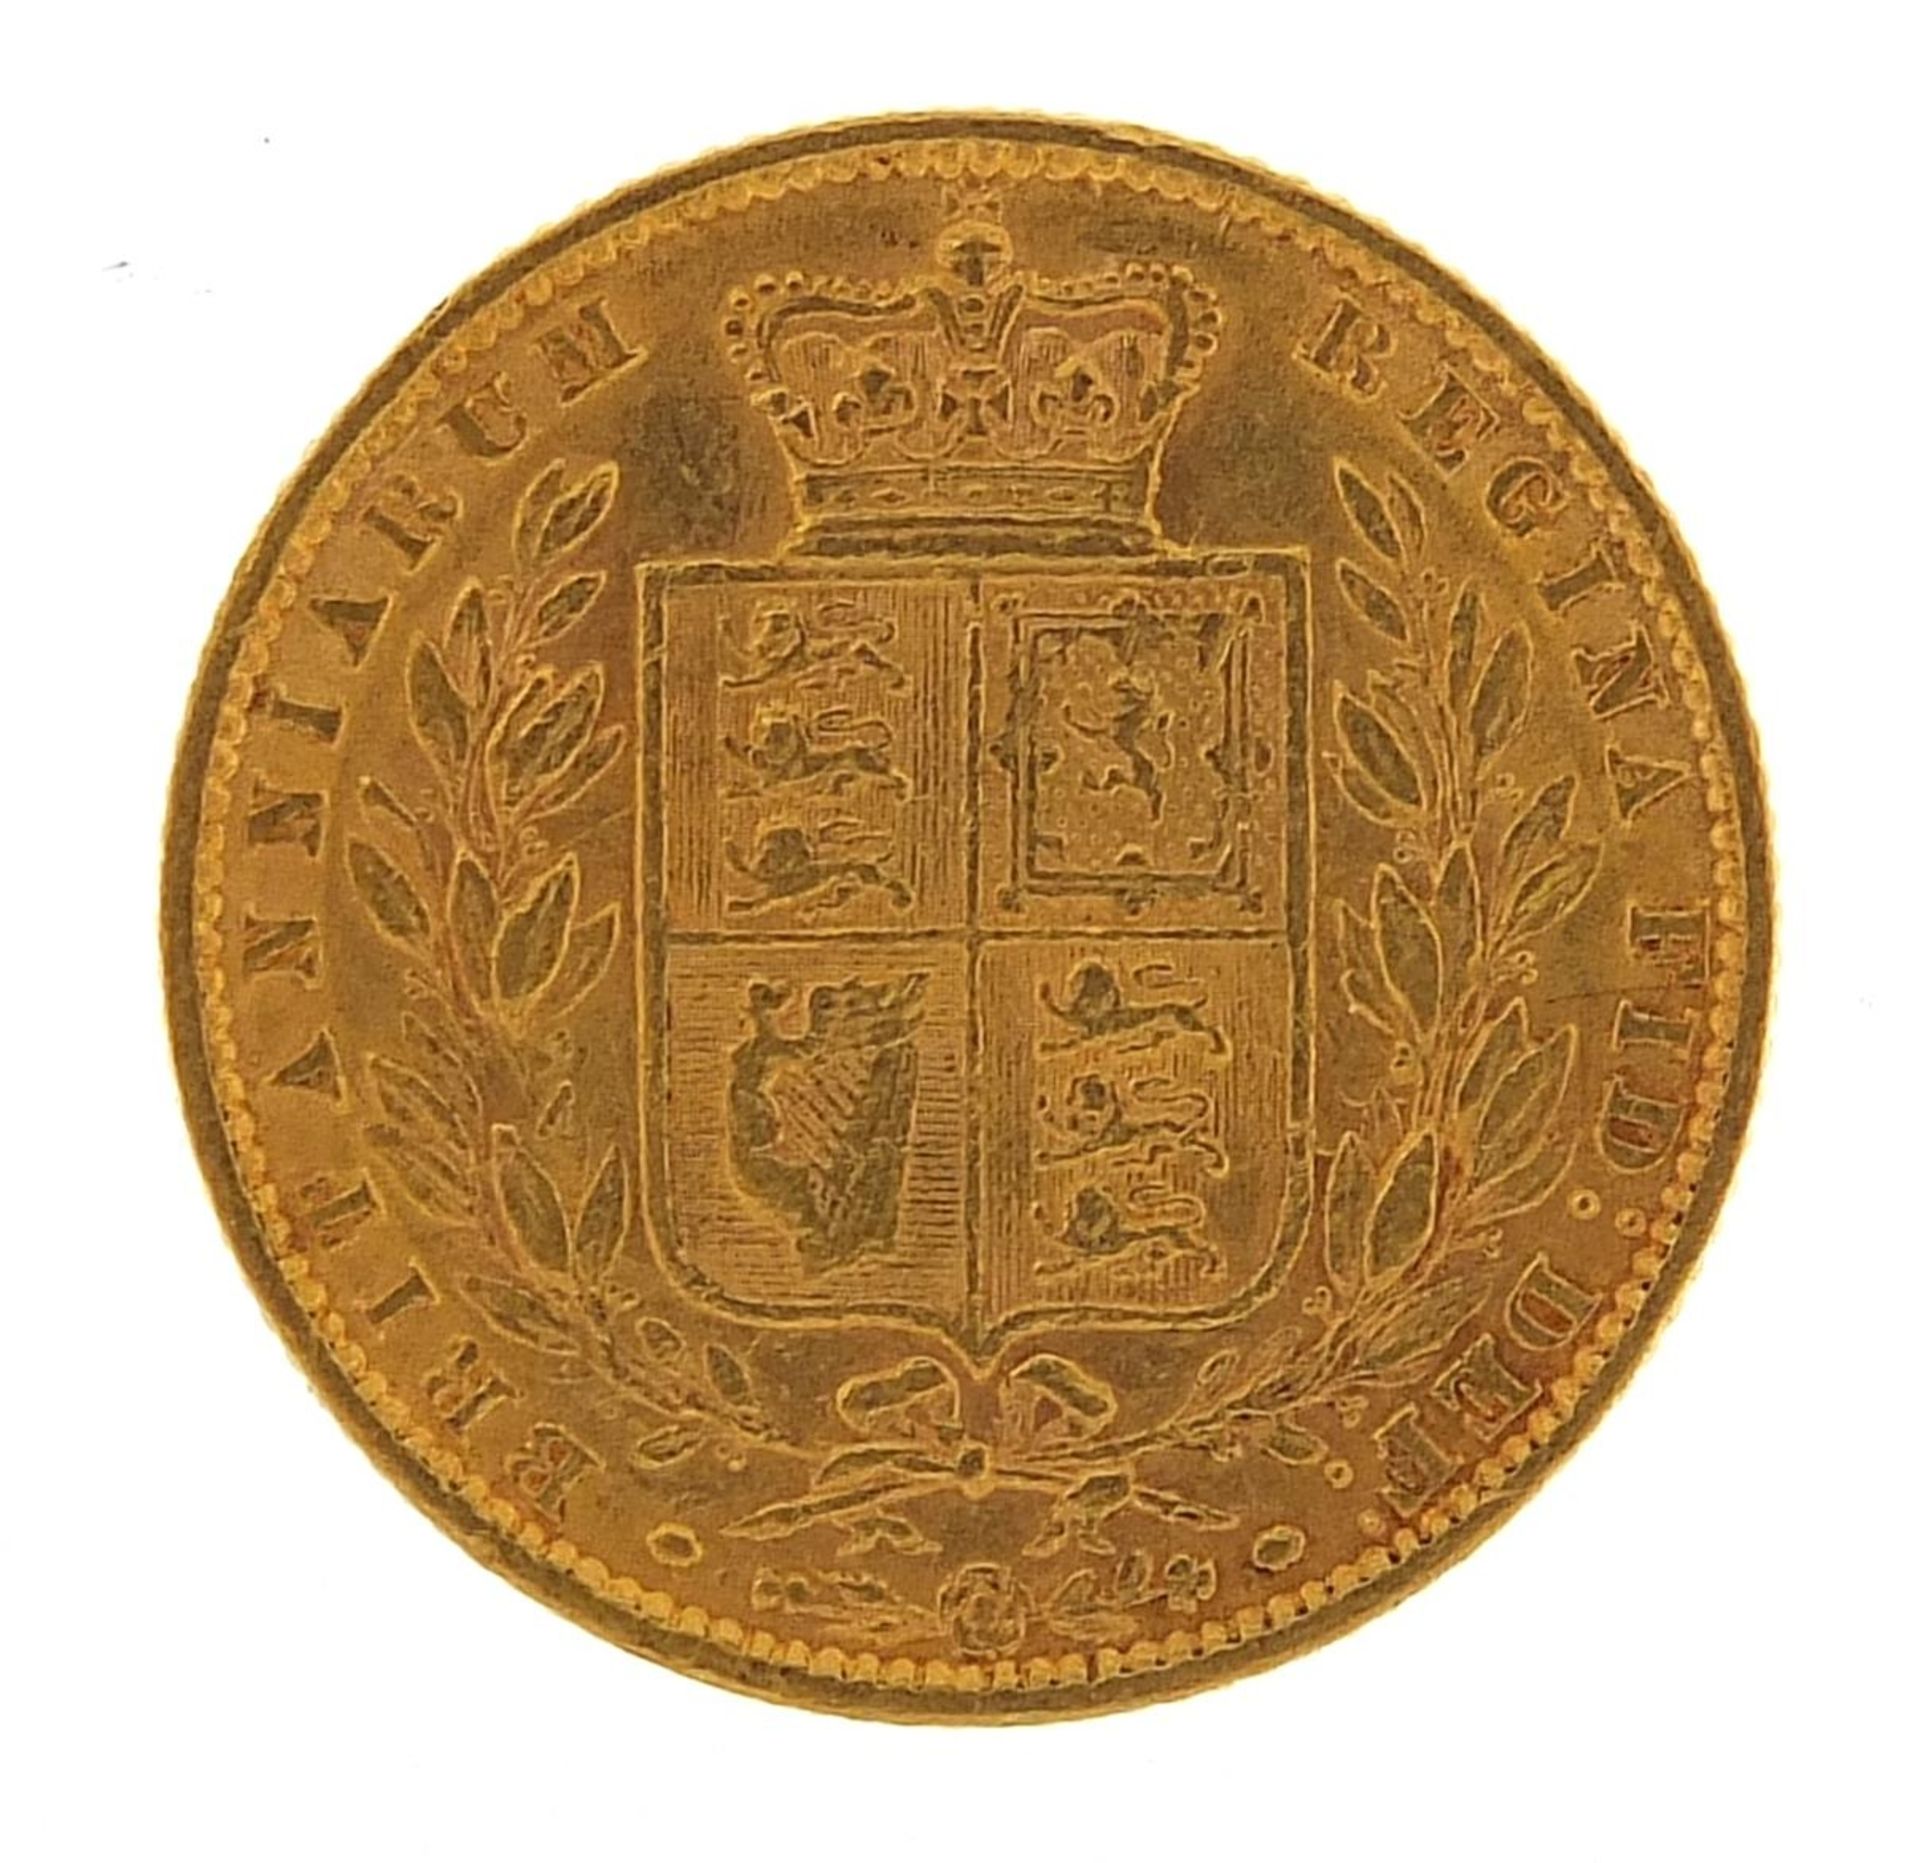 Queen Victoria Young Head 1862 shield back gold sovereign - this lot is sold without buyer's premium